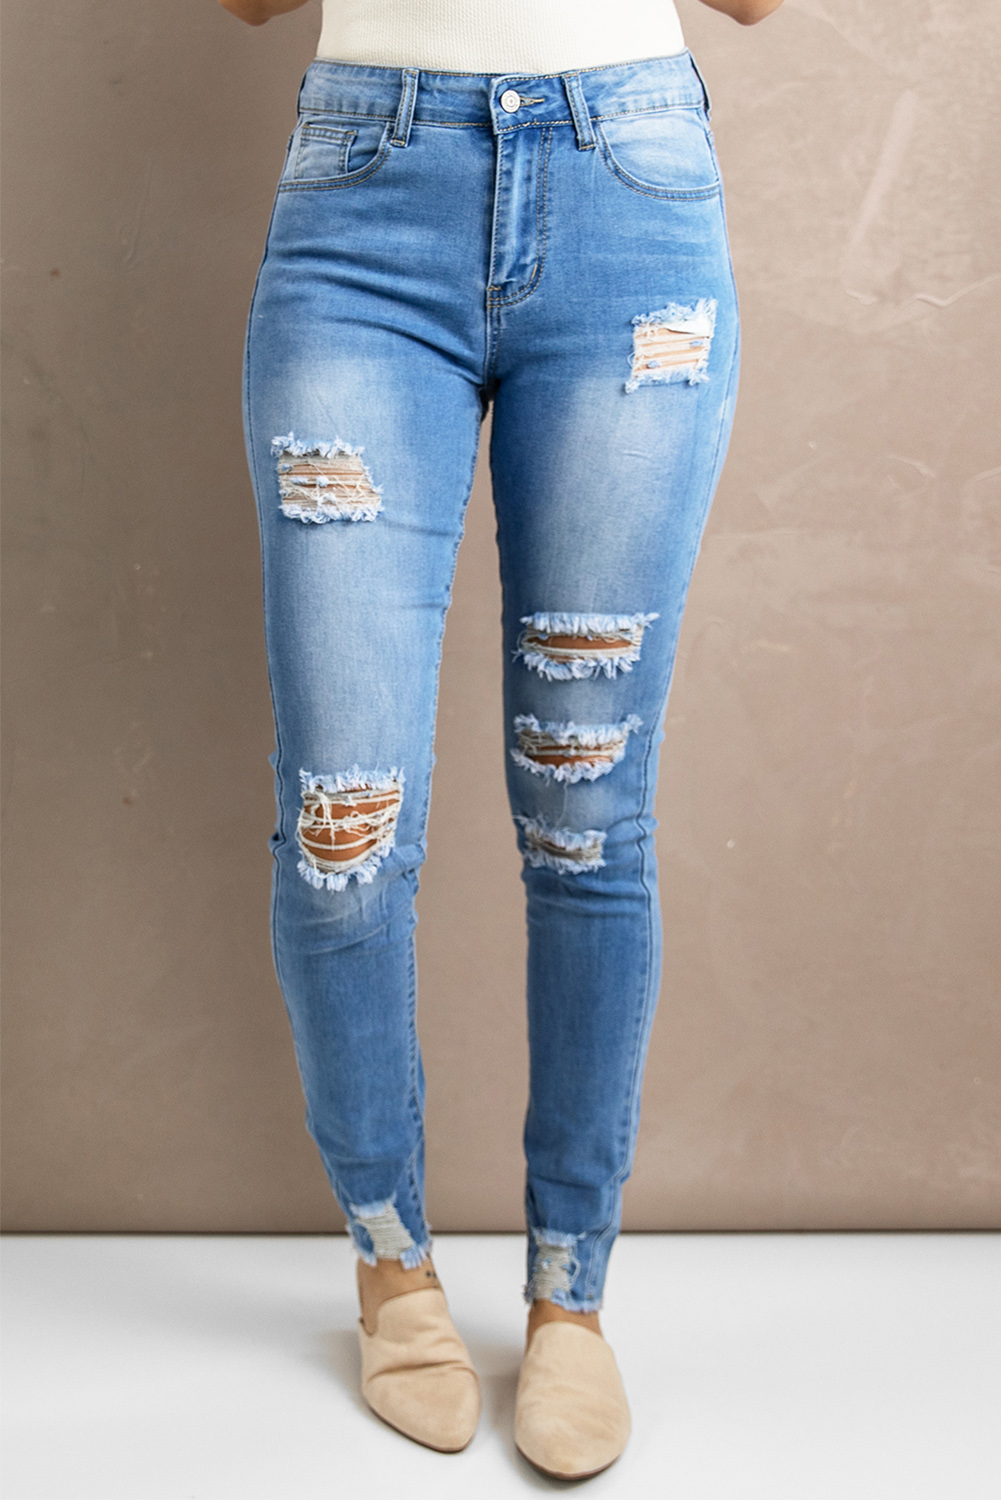 Wholesale Light Blue Ripped Tapered High Rise SKINNY JEANS 